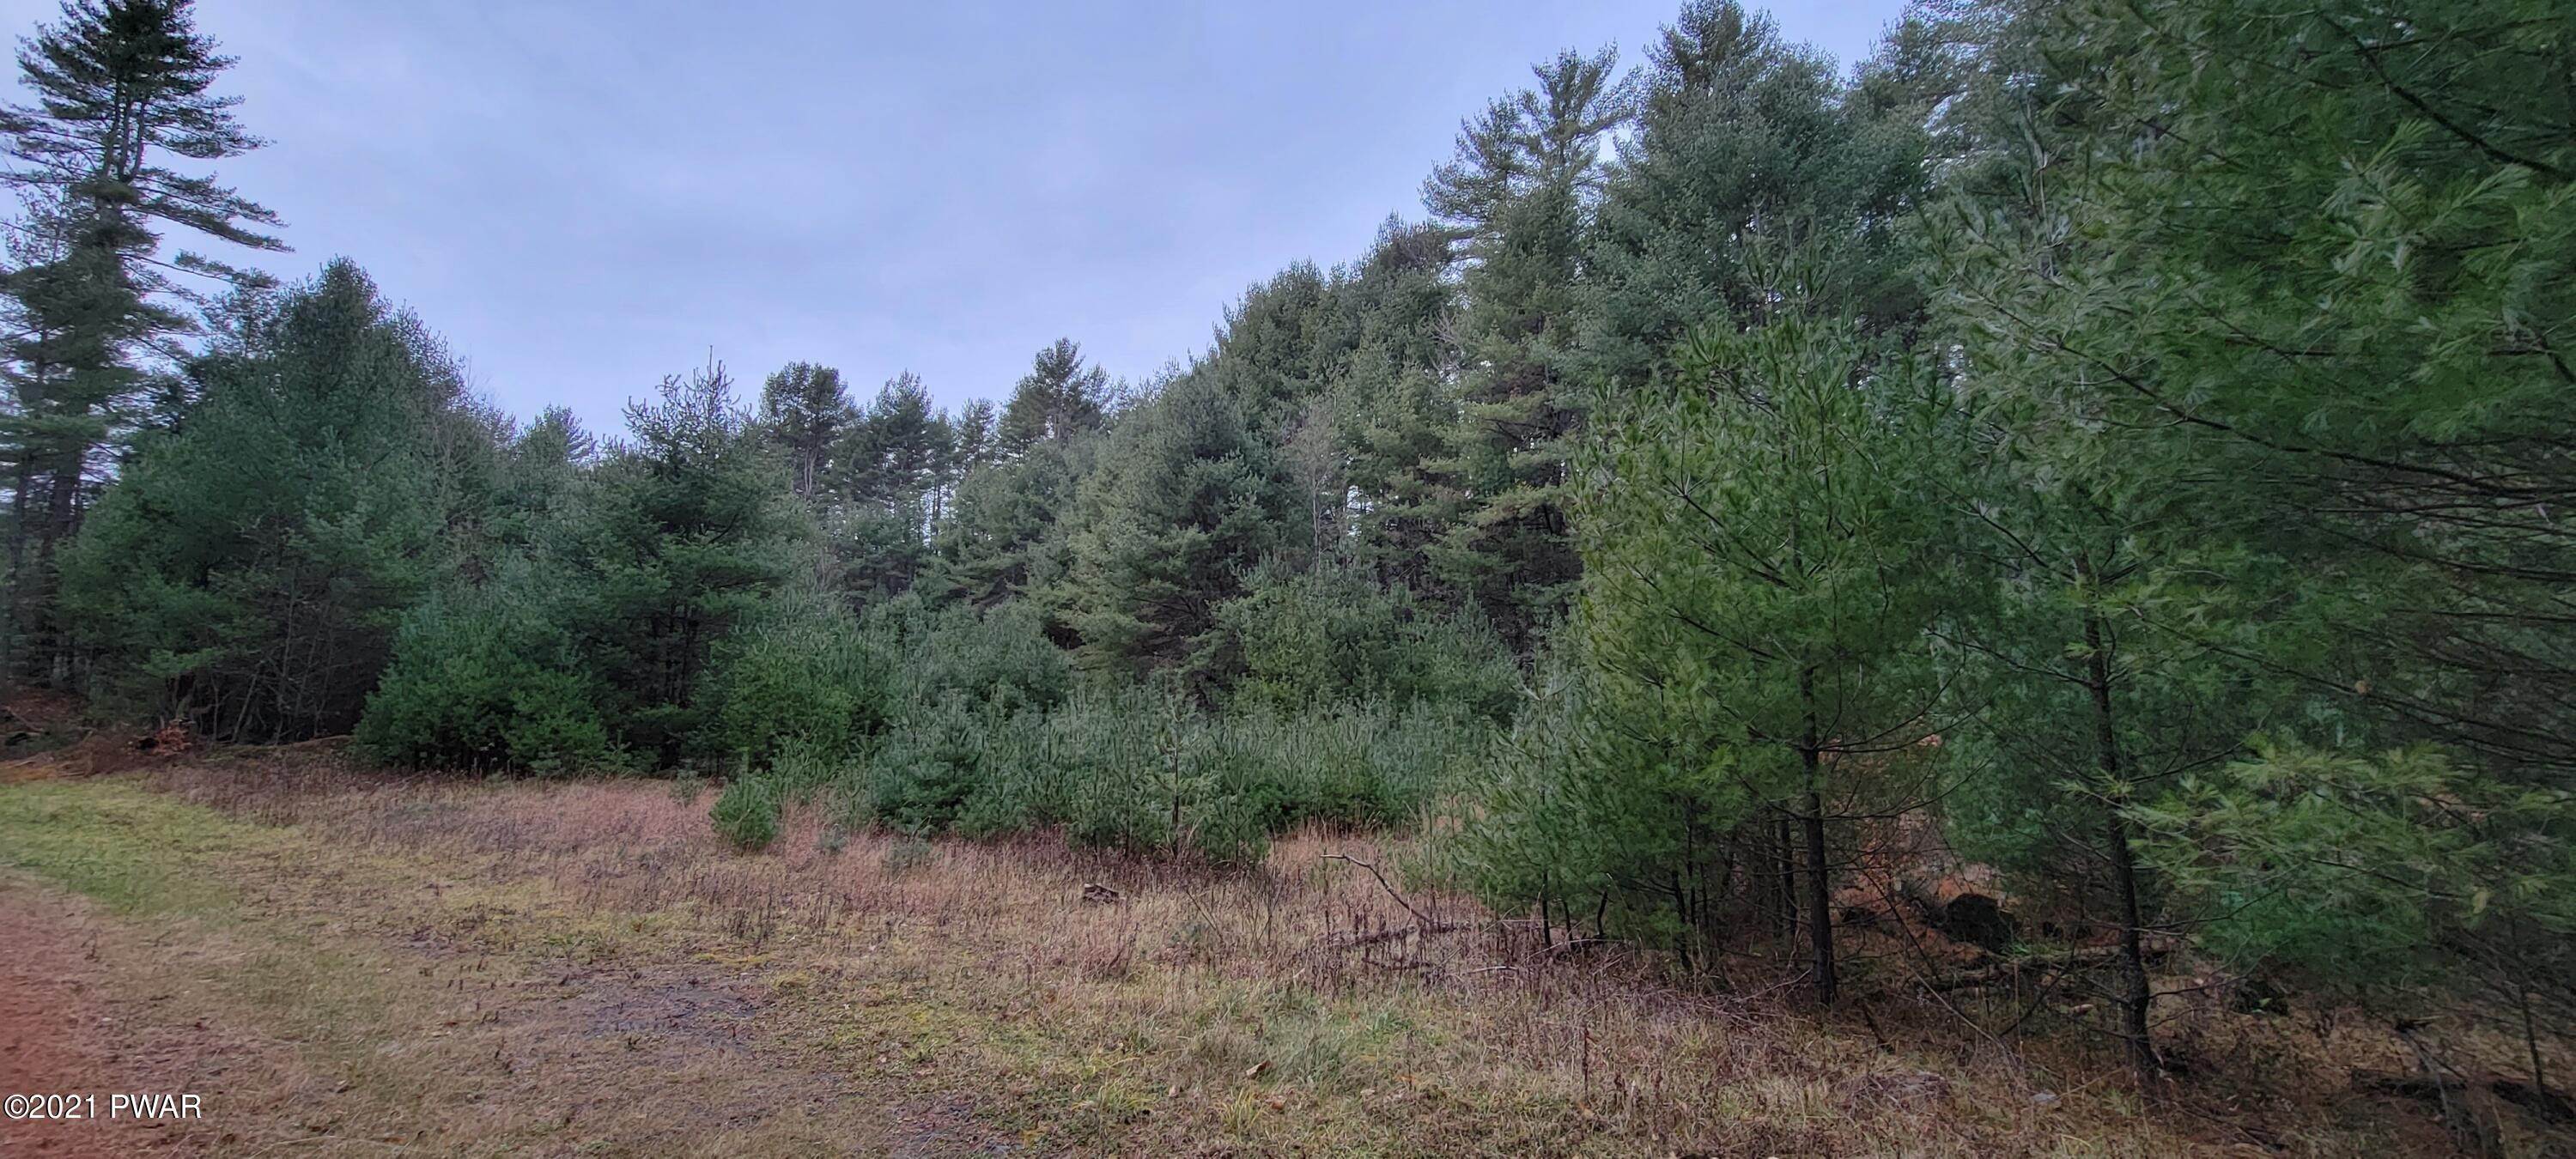 12. Land for Sale at Lot 43 Swamp Pond Rd Narrowsburg, New York 12764 United States